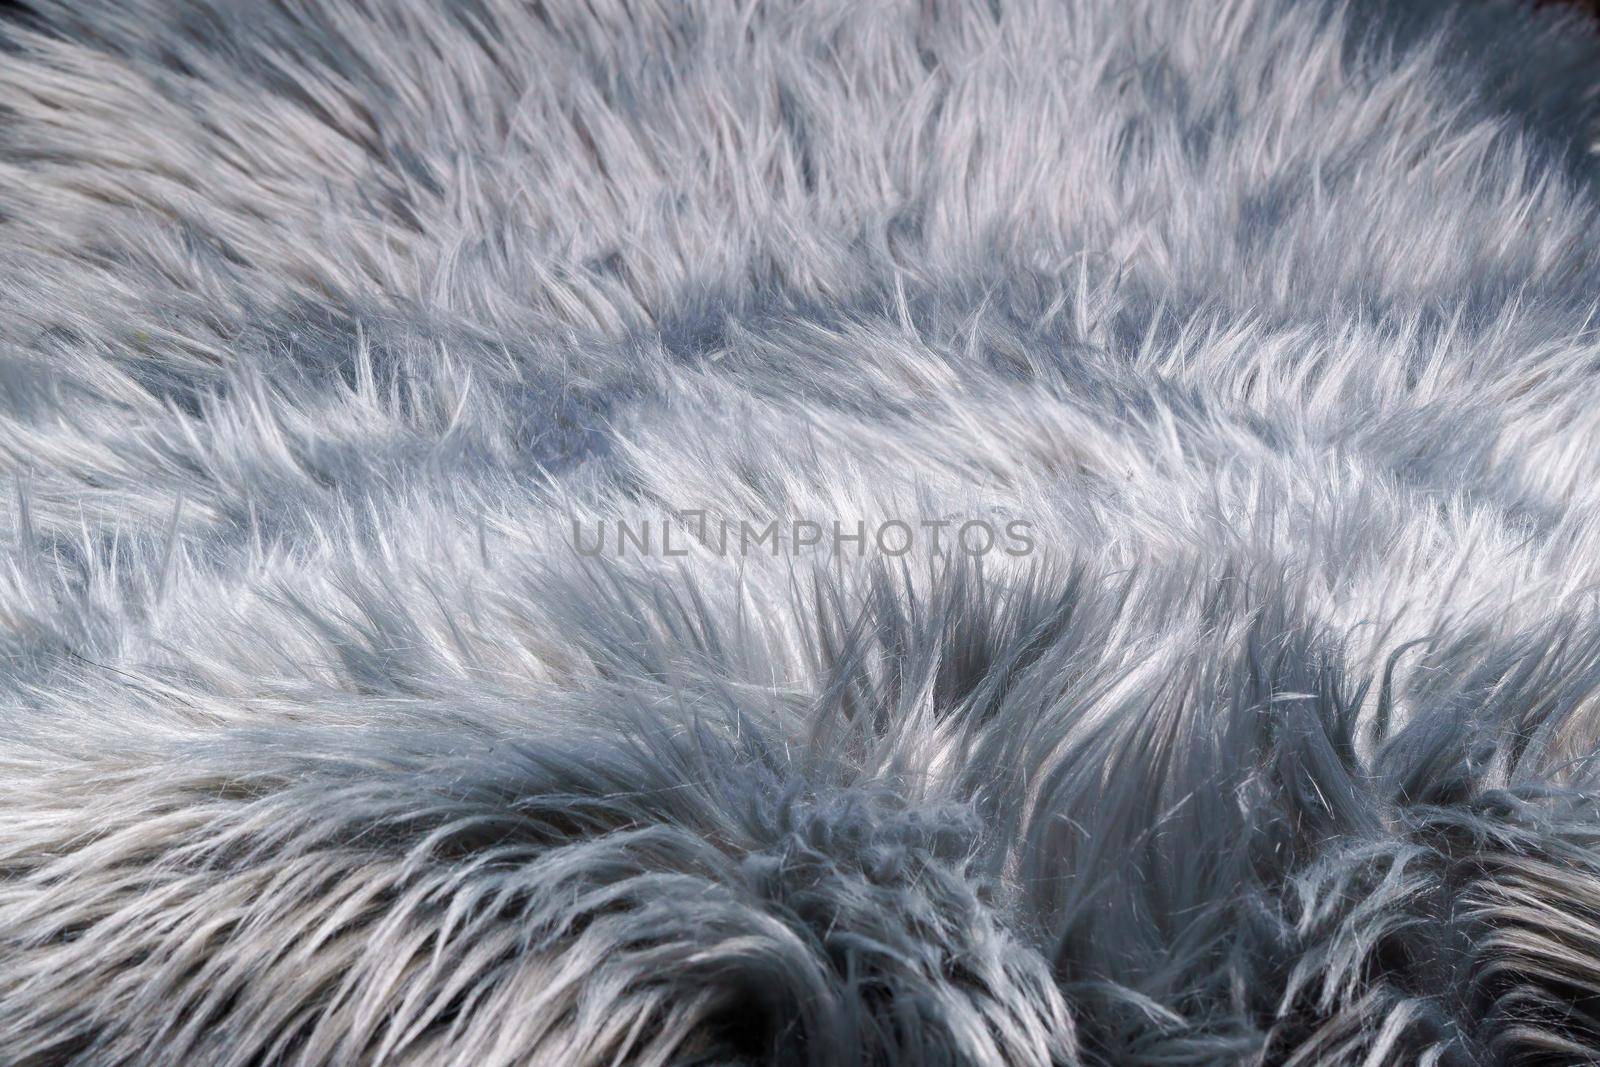 A fur-like silver gray carpet structure, close-up